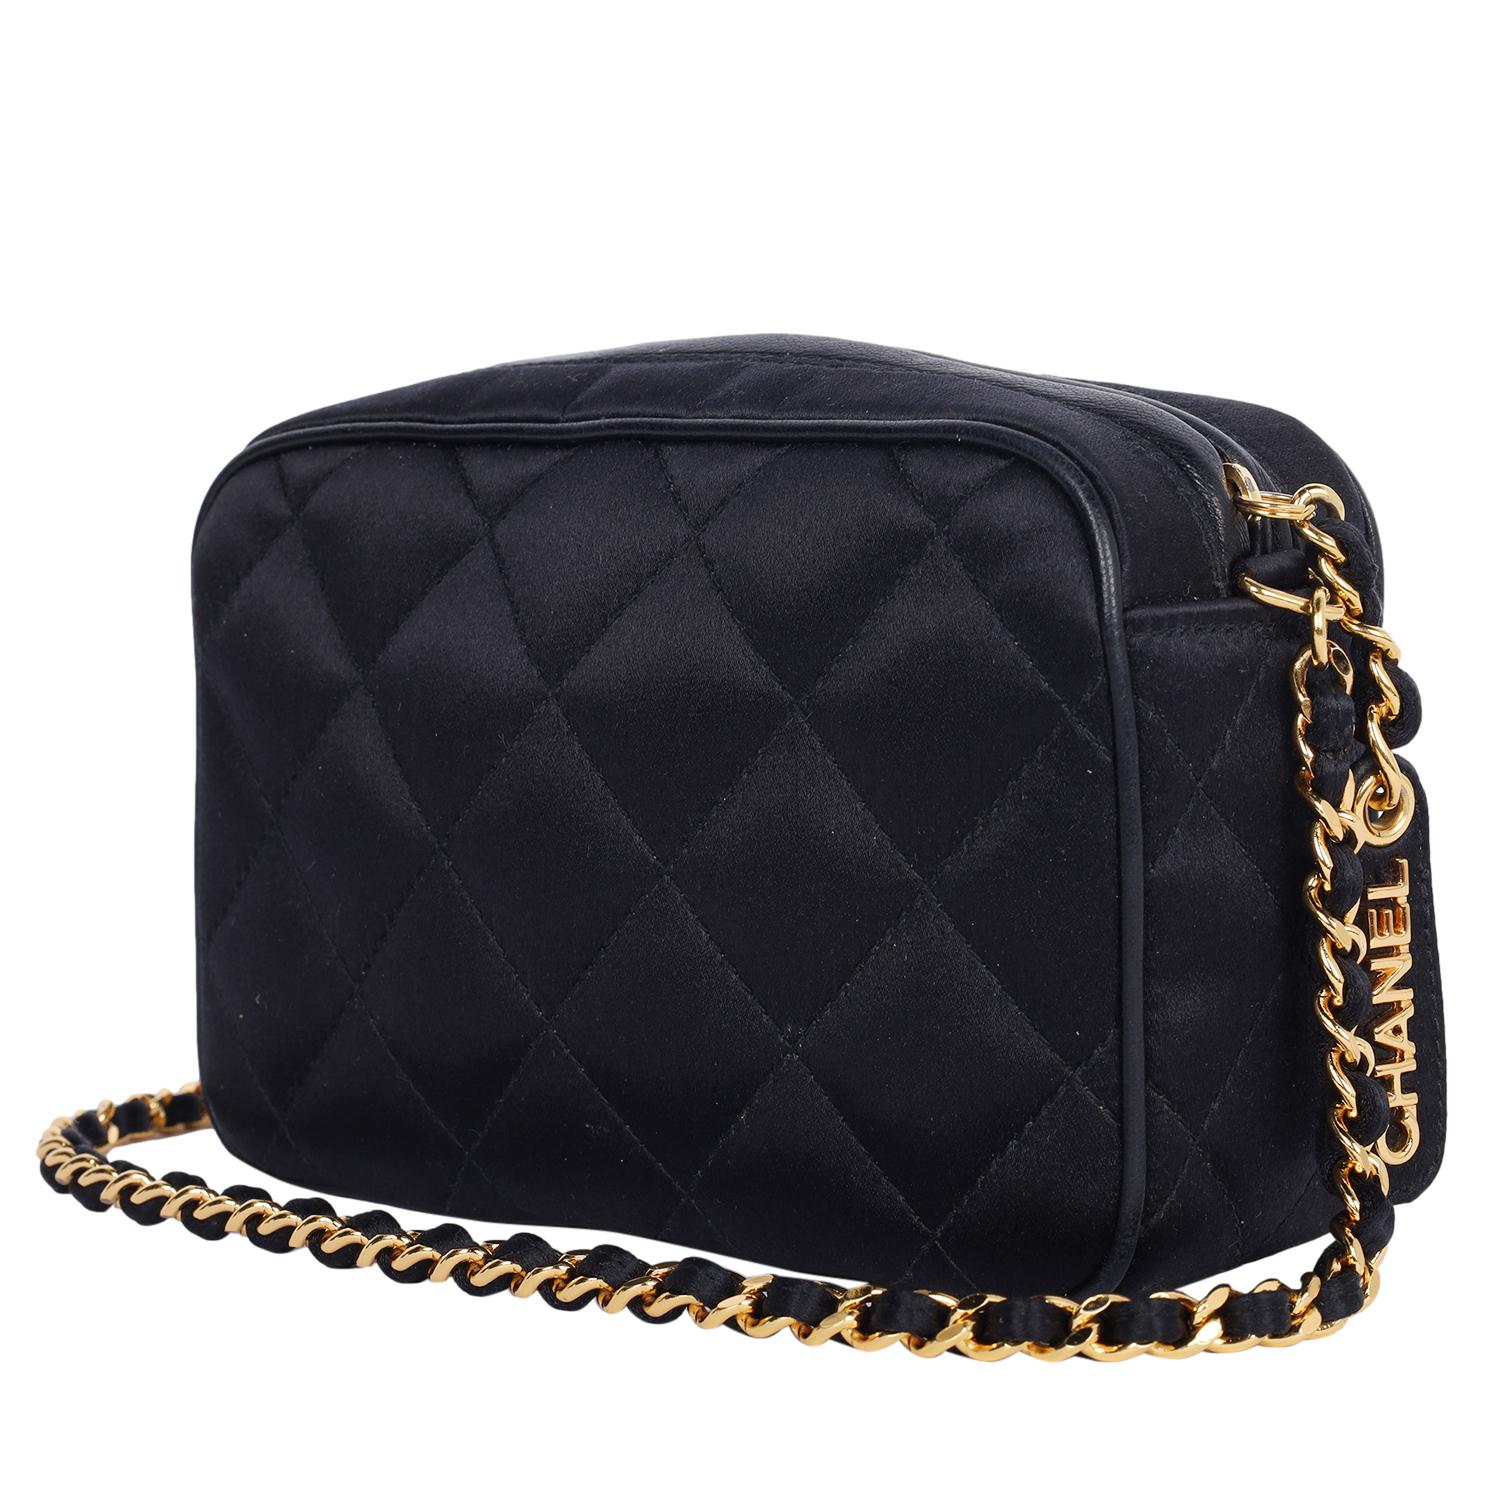 Chanel Mini Satin Leather Quilted Camera Cross Body Bag 1996 For Sale 5